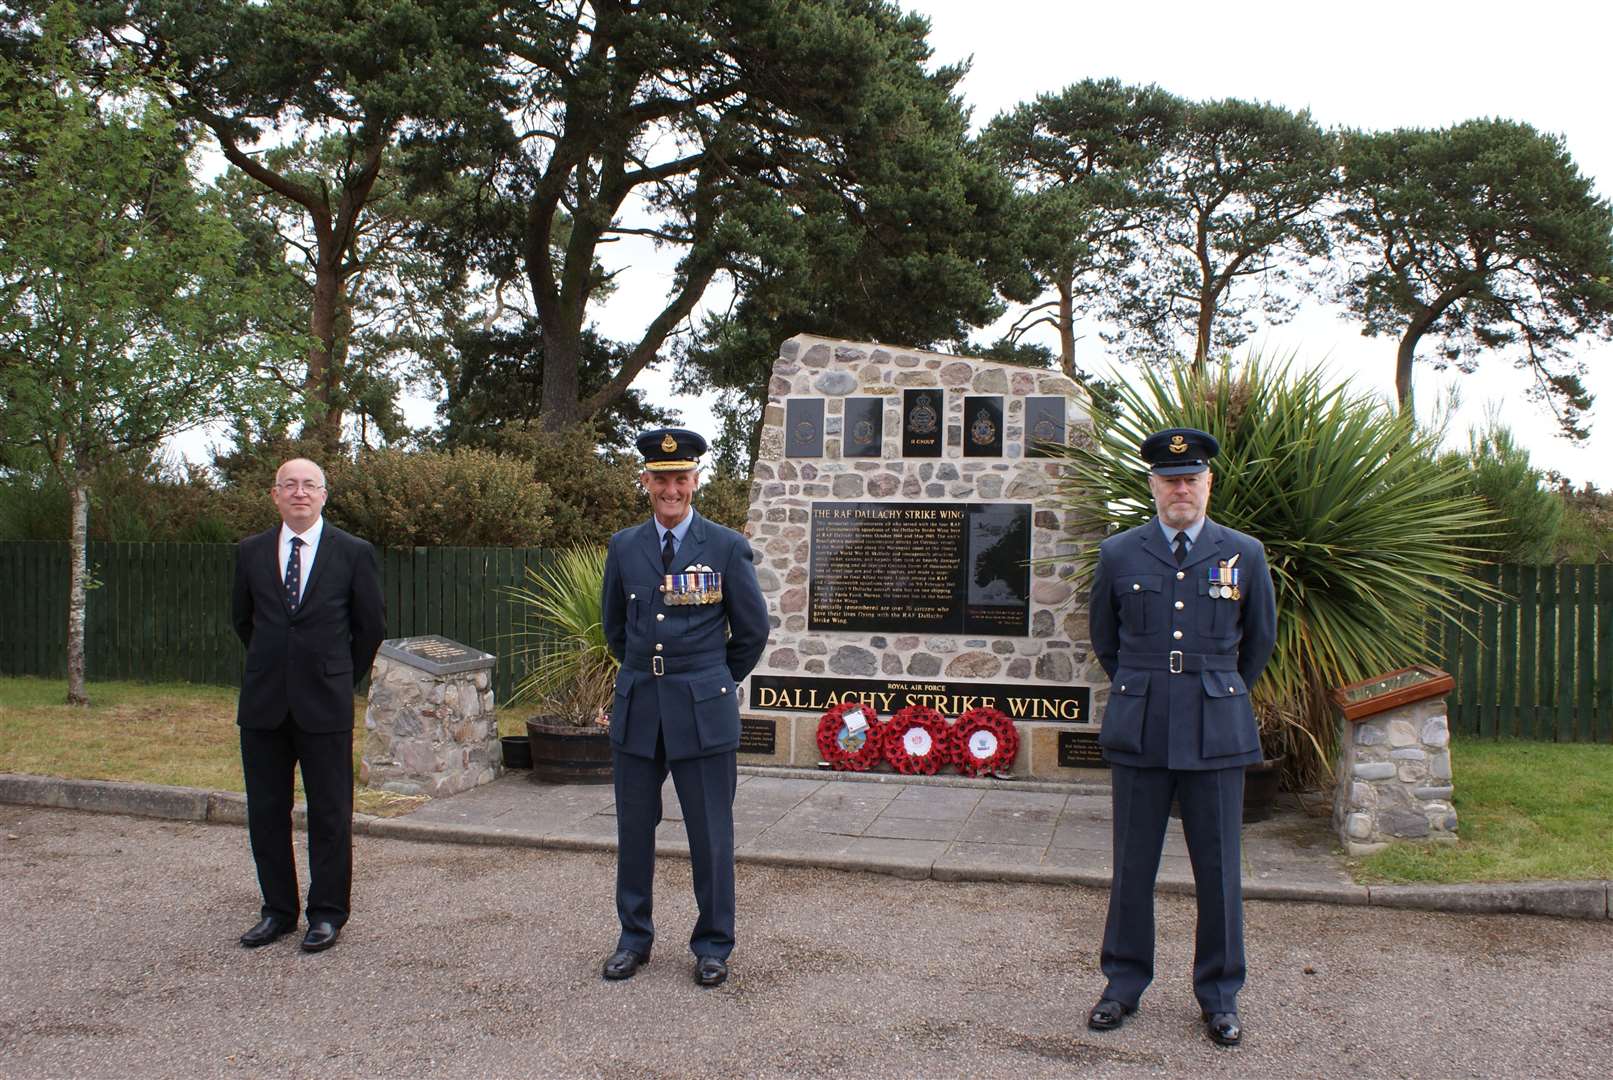 Paying their respects at the Canada Day service held at Dallachy Strike Wing memorial are (from left) Councillor Marc Macrae, Deputy Lord Lieutenant for Moray Alistair Monkman CBE DL MA and Squadron Leader Dougie Potter.